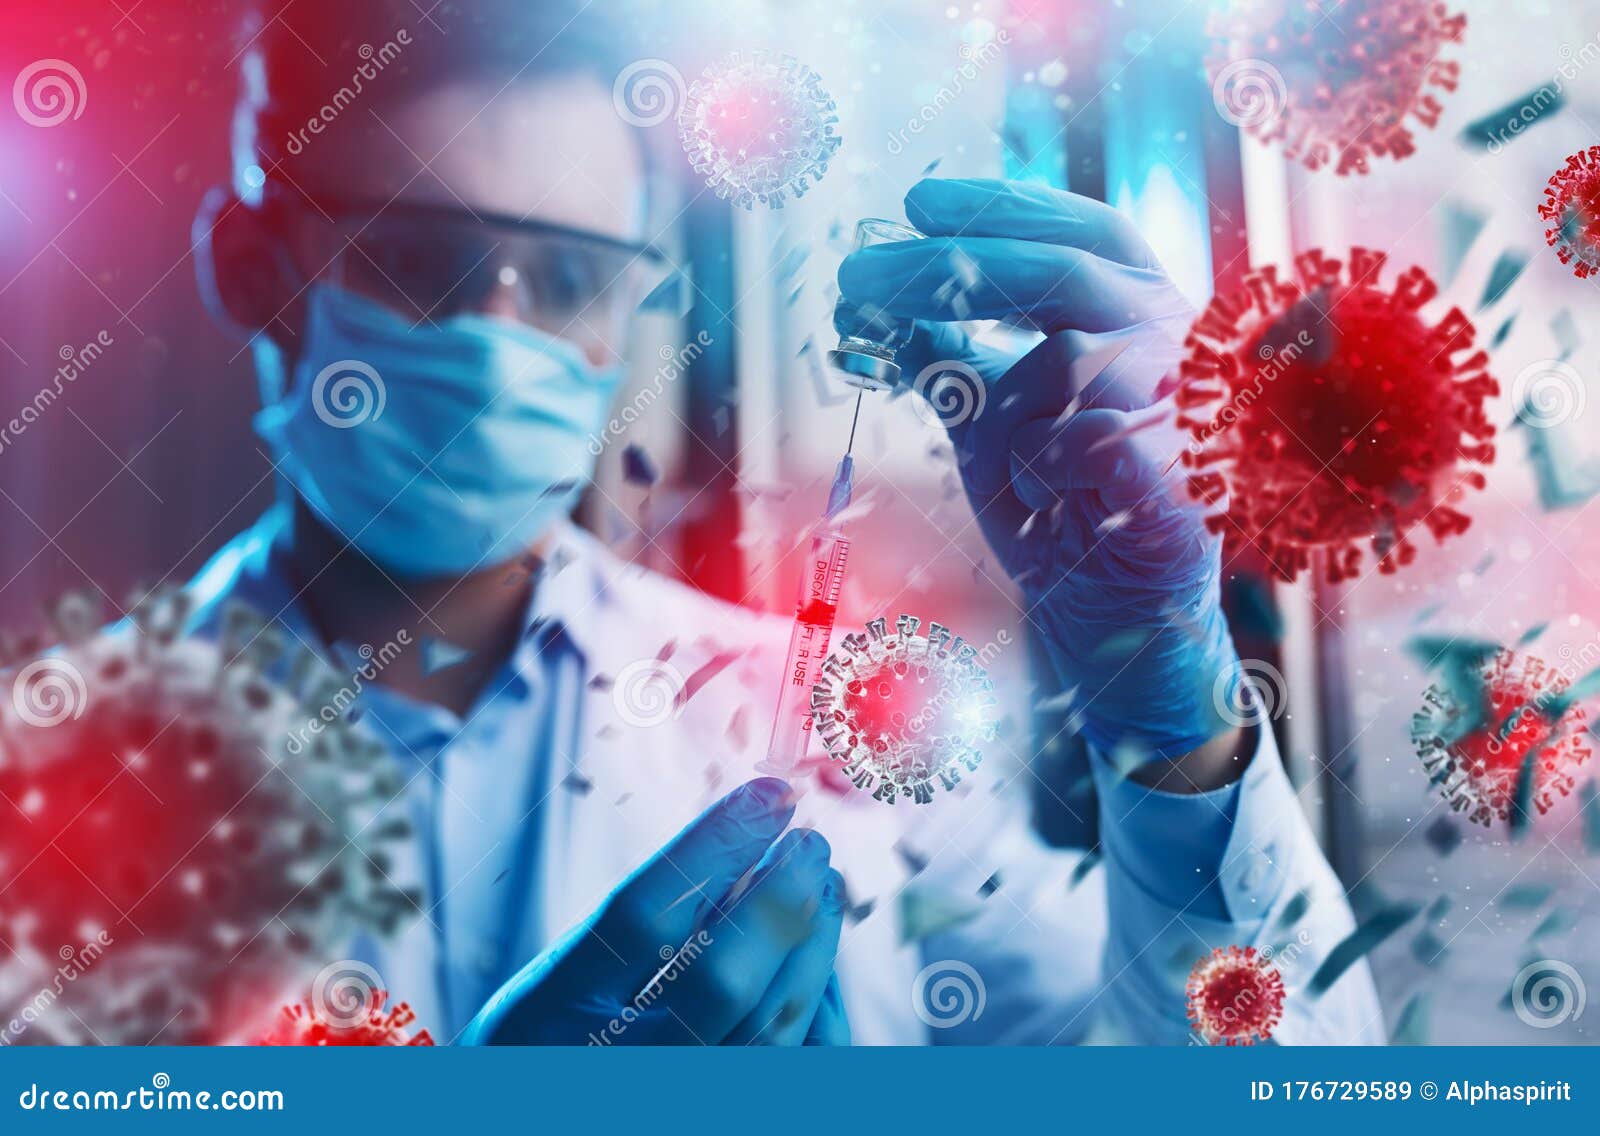 medic with mask works on a solution for covid 19 virus. concept of medical research